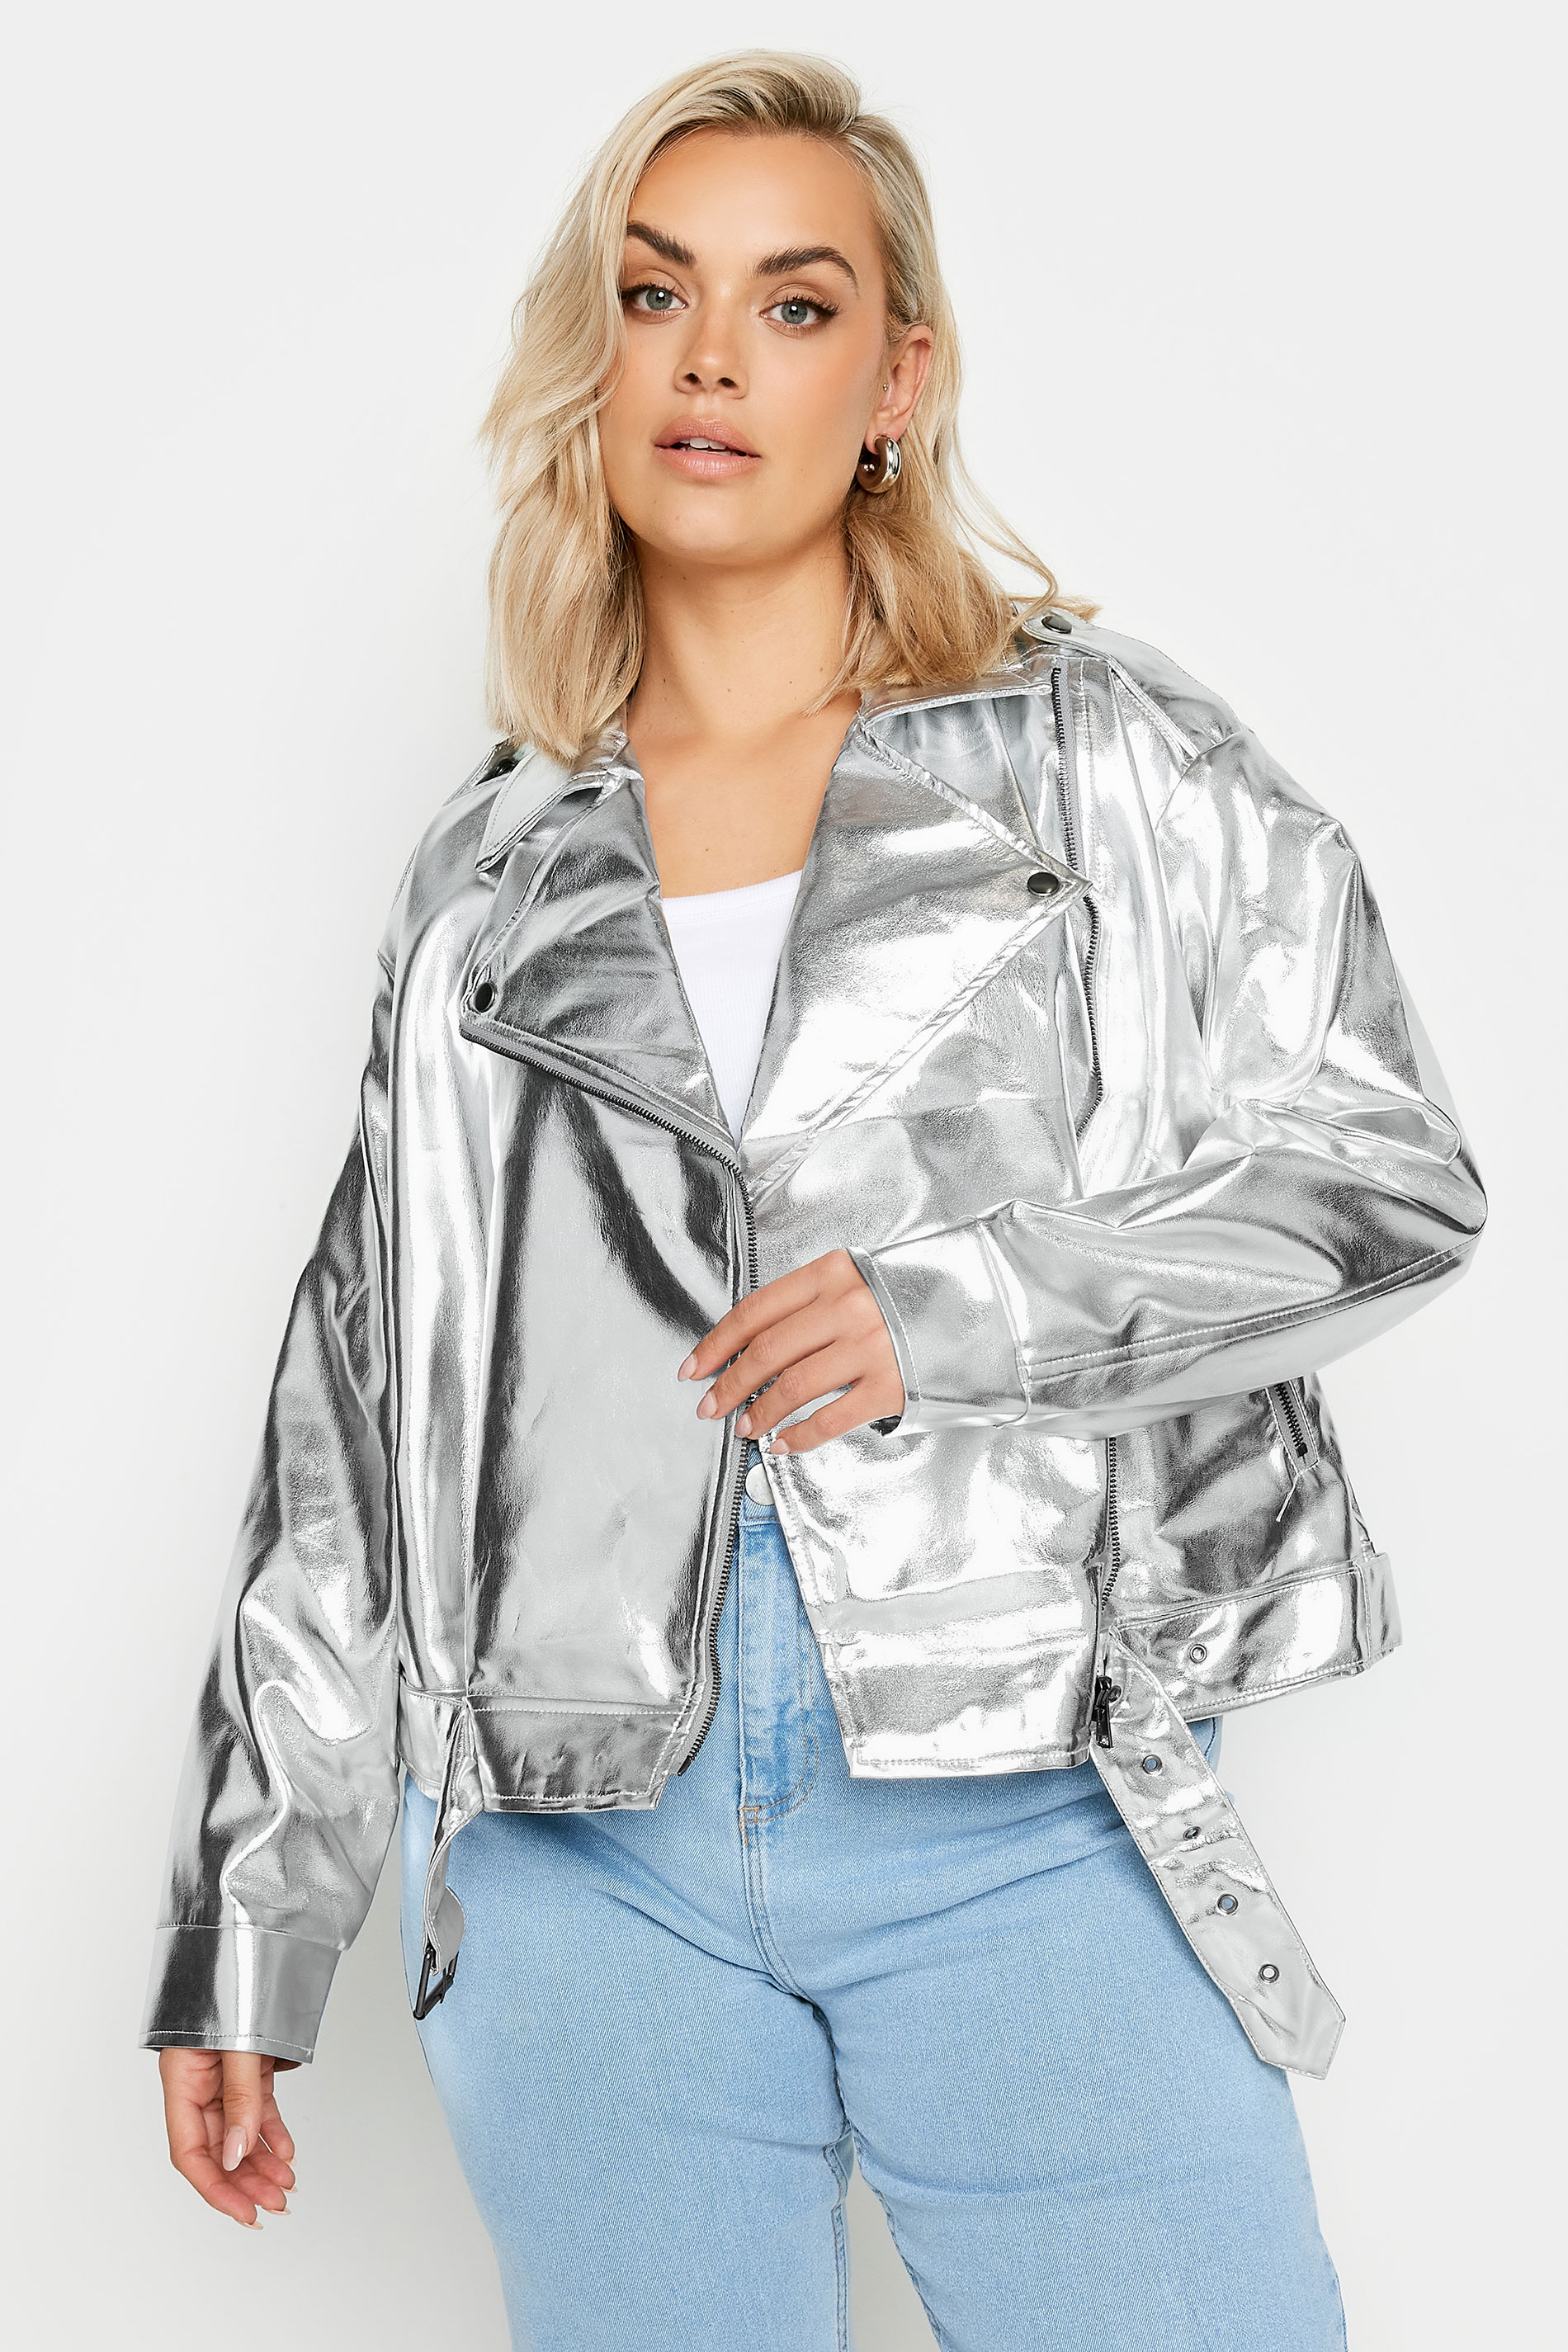 LIMITED COLLECTION Plus Size Silver Metallic Biker Jacket | Yours Clothing 2